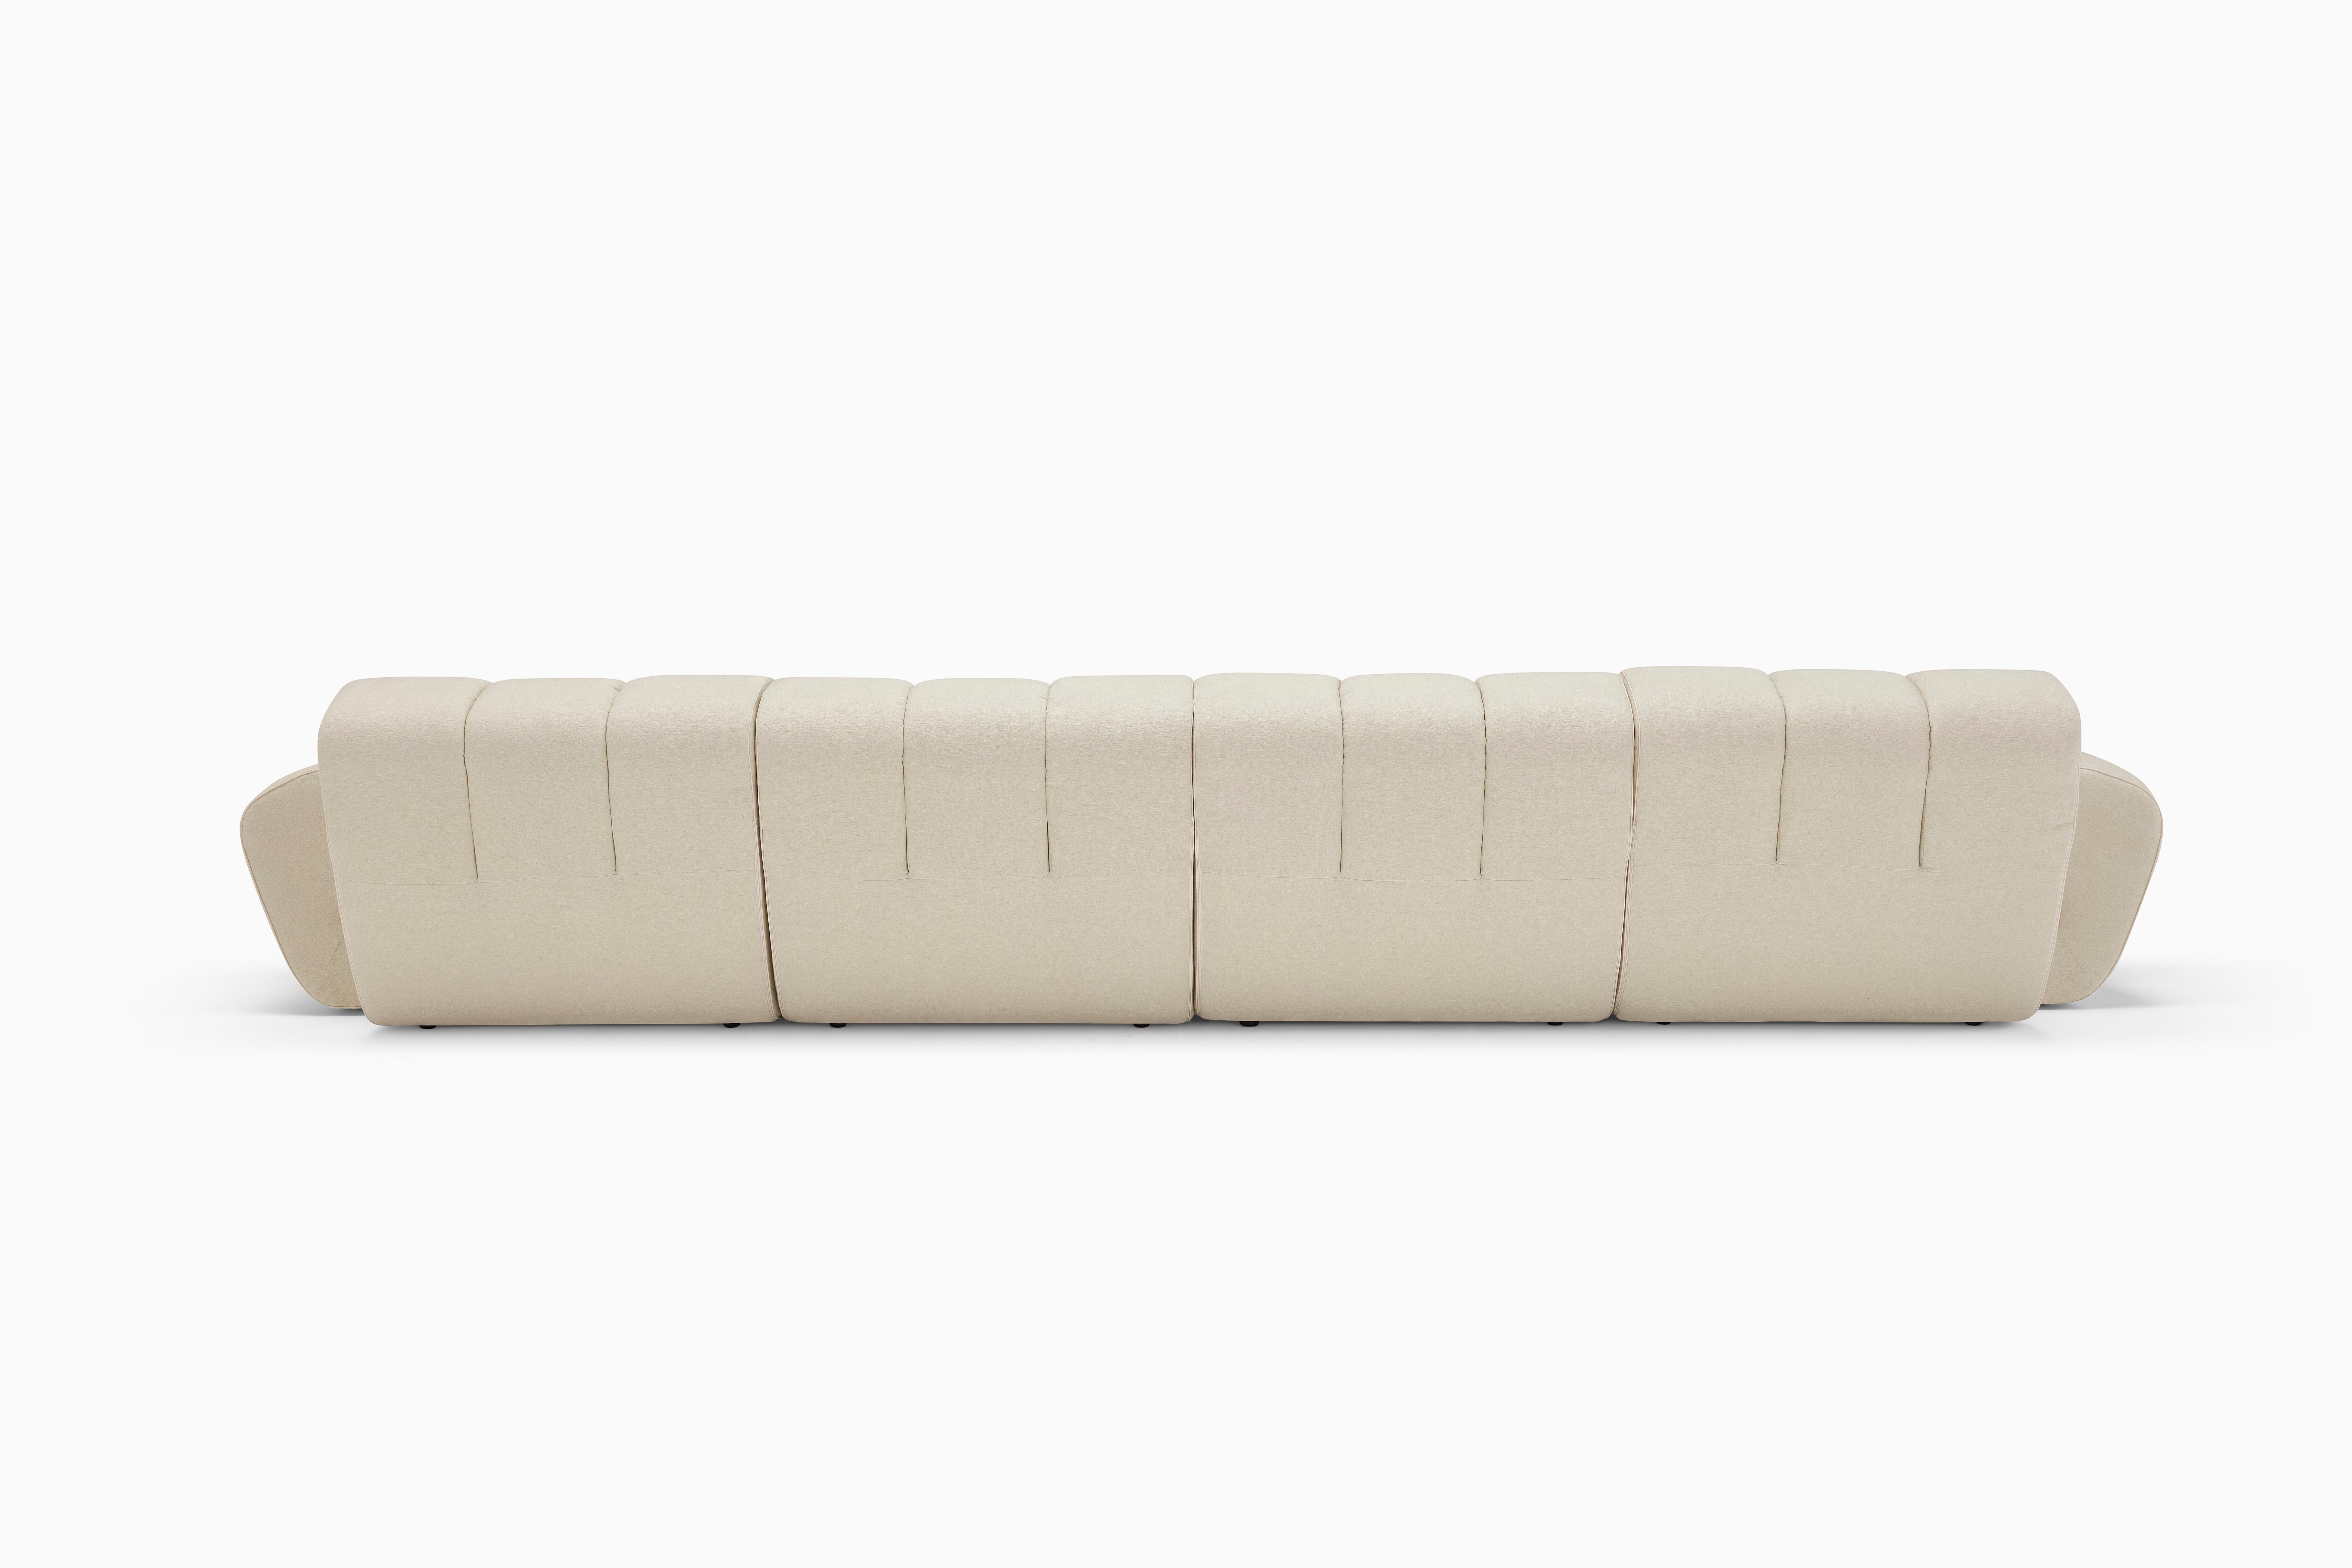 Contemporary Sectional Sofa 'Palmo' by Amura Lab, Brera 850, Ref. 13 For Sale 1